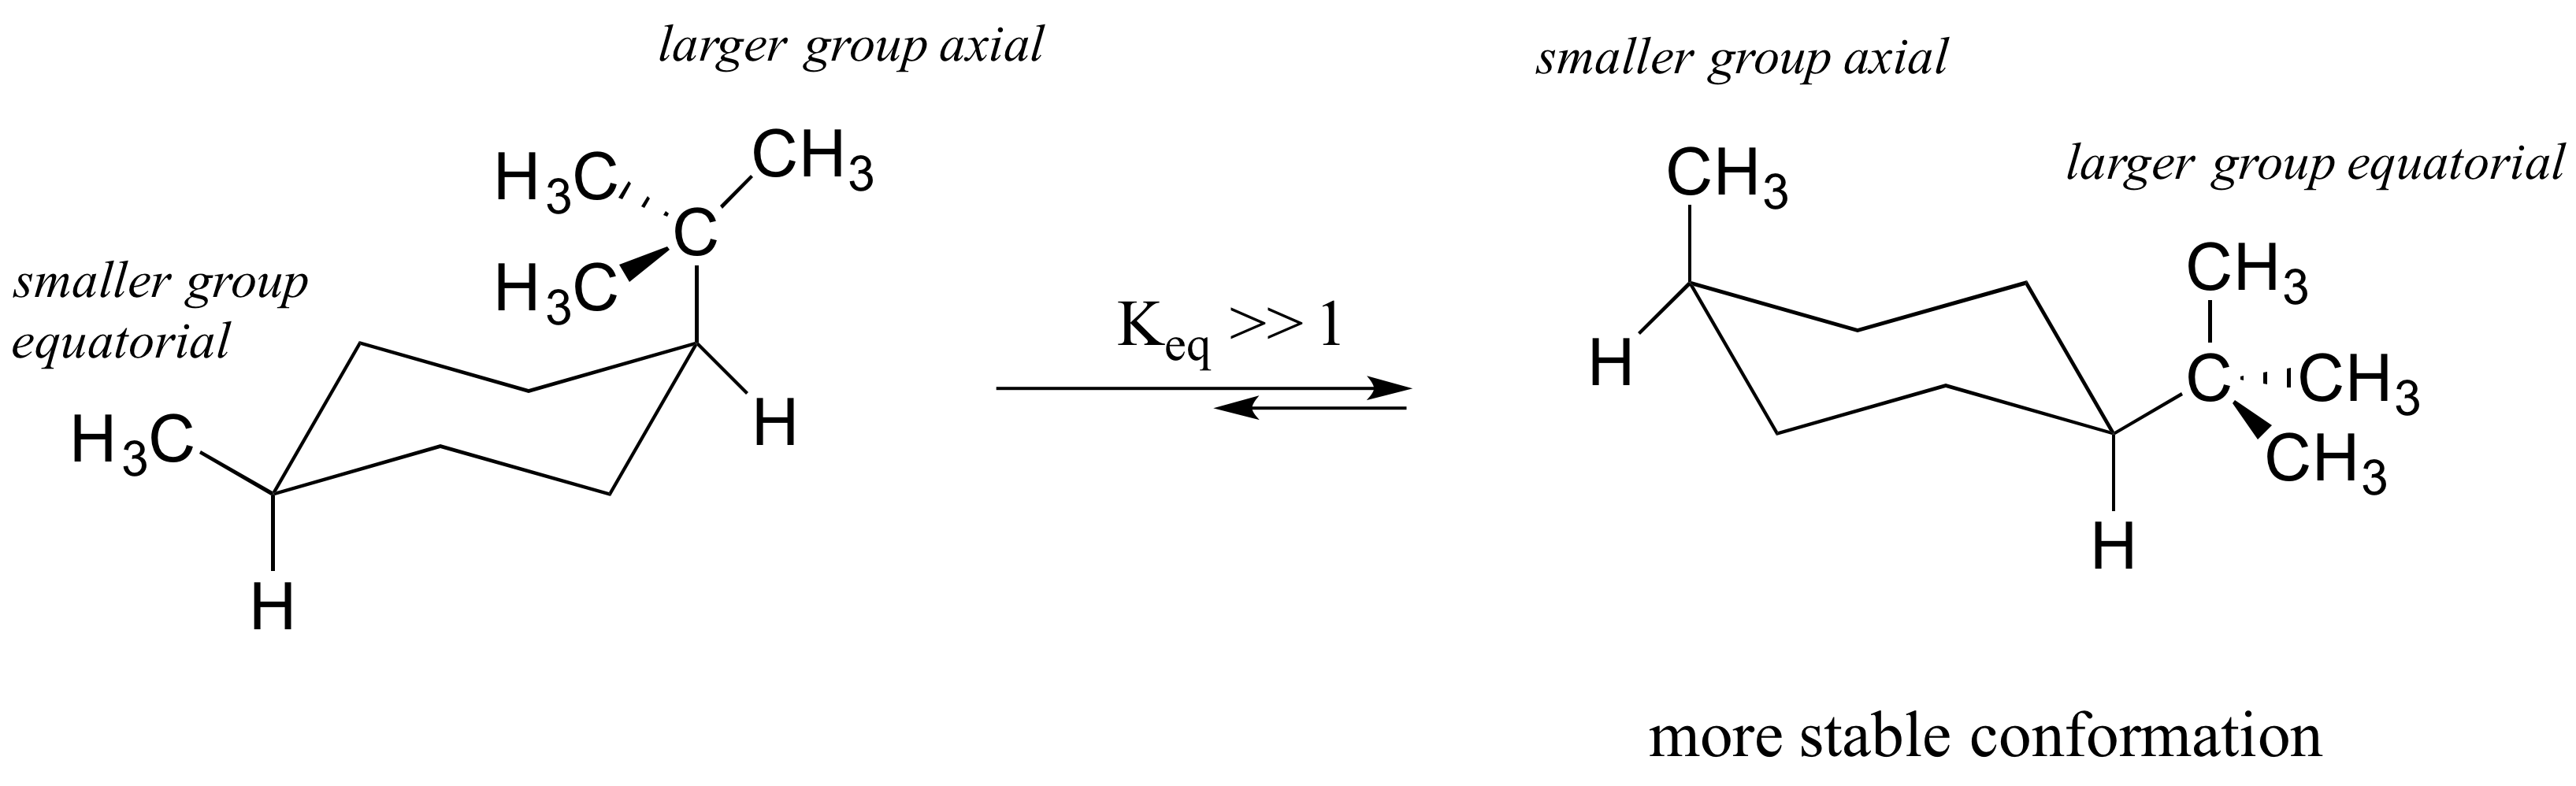 Left: Cyclohexane with tert-butyl (larger group) axial and methyl (smaller group) equatorial. Right: Methyl (smaller group) axial and tert-butyl (larger group) equatorial. More stable conformation. Equilibrium constant much greater than one.